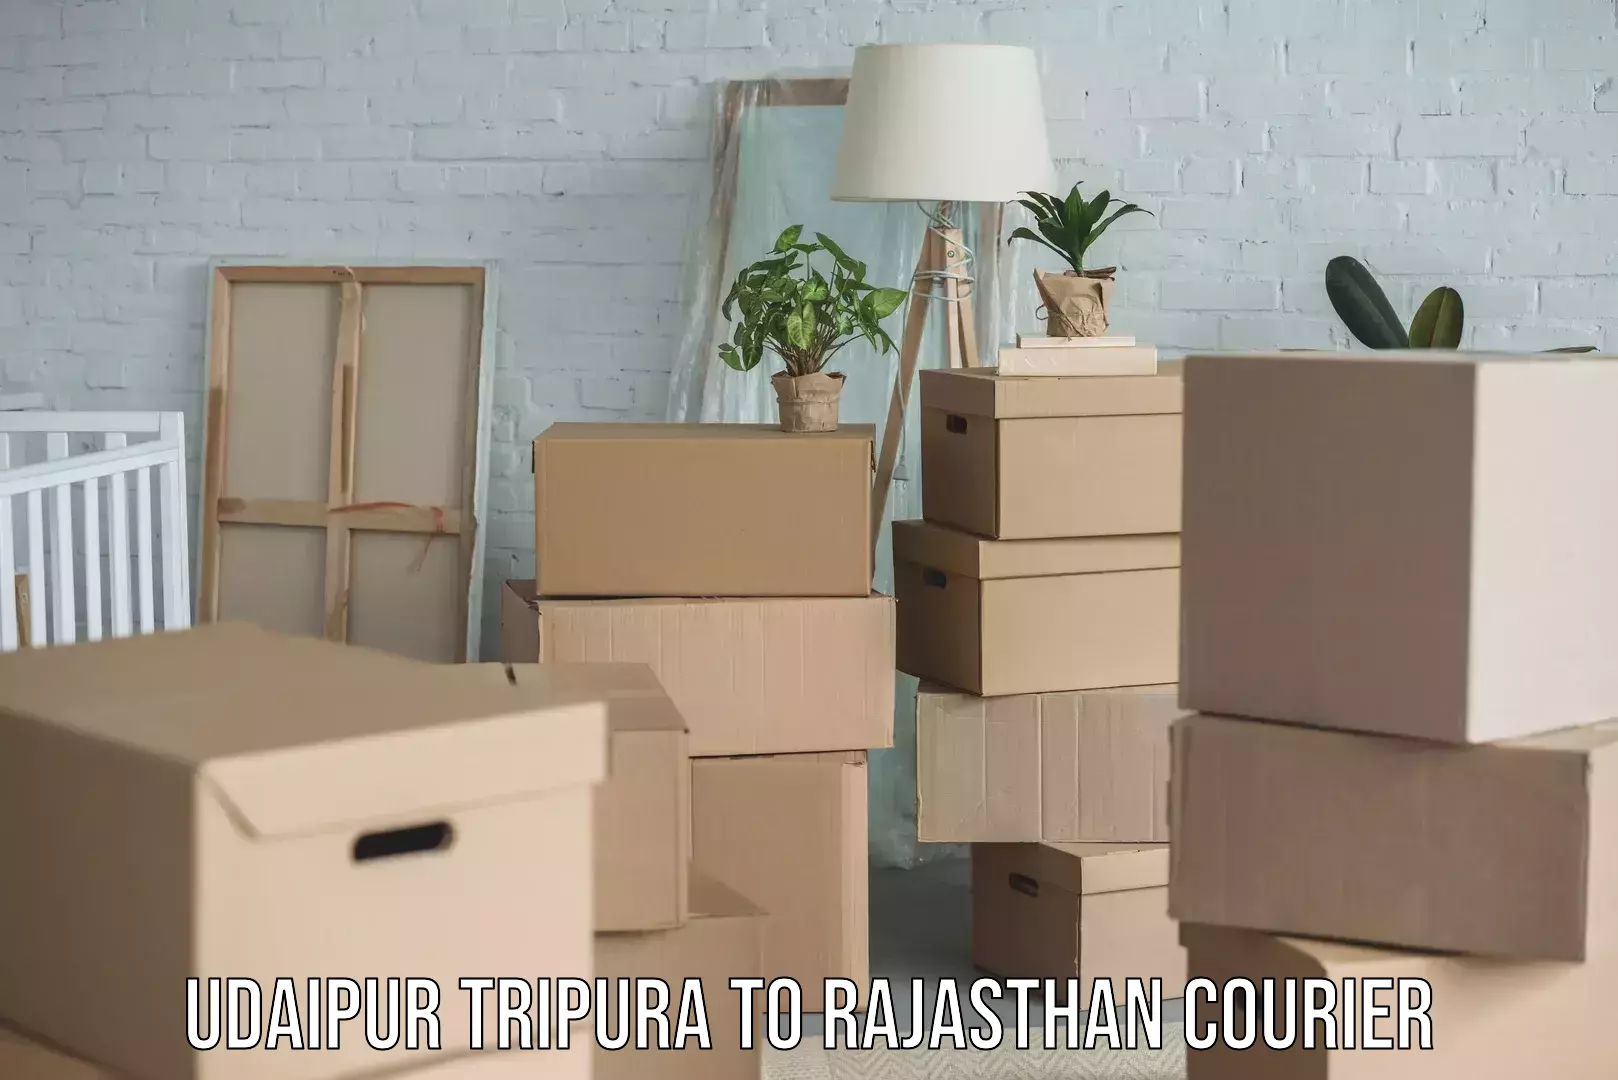 Nationwide courier service Udaipur Tripura to Rajasthan